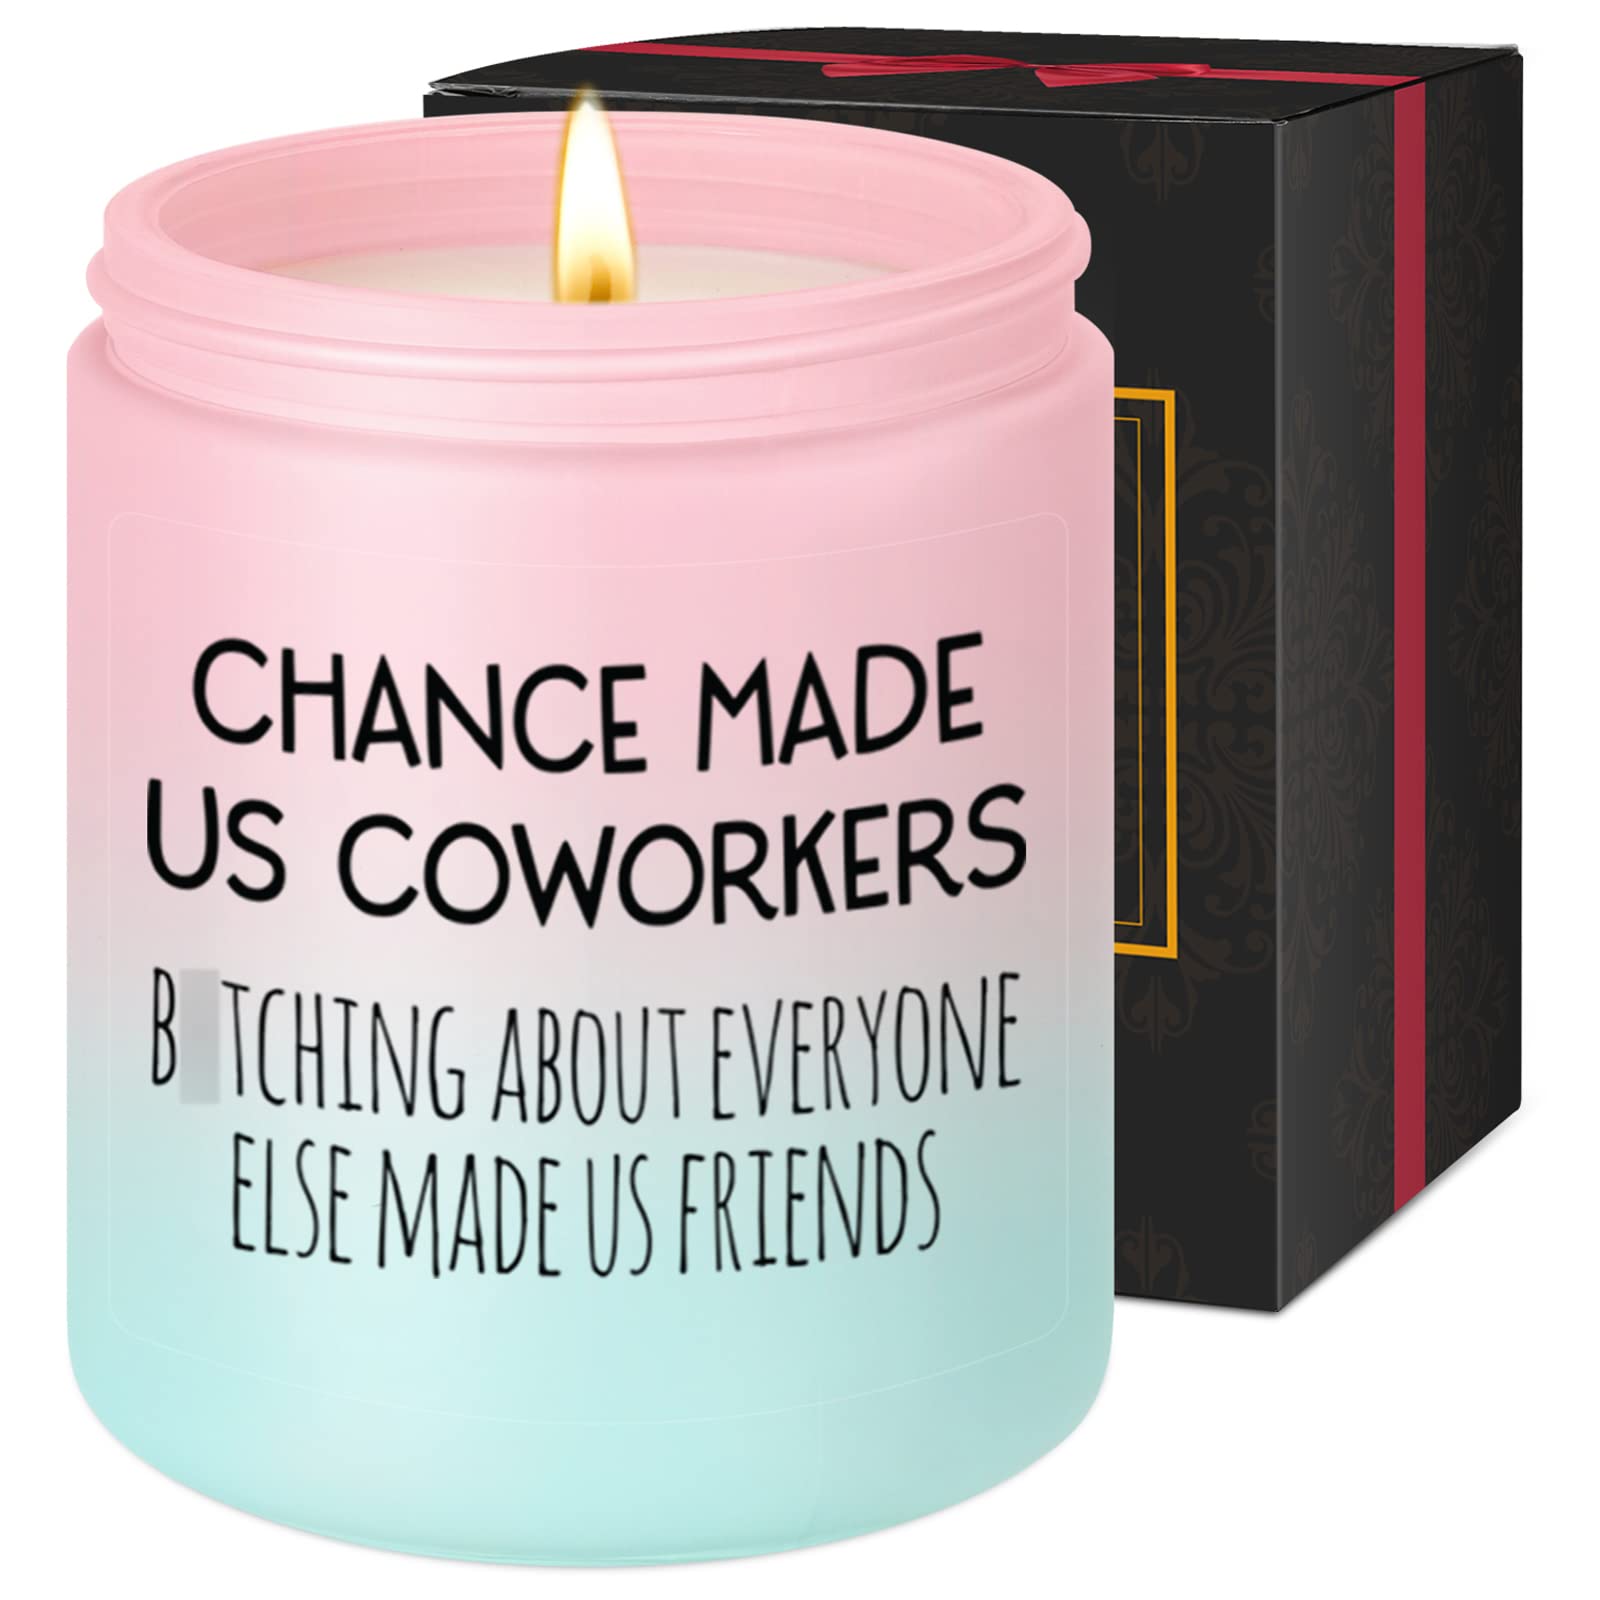 Co Worker Leaving Coworker candle farewell gift for coworker